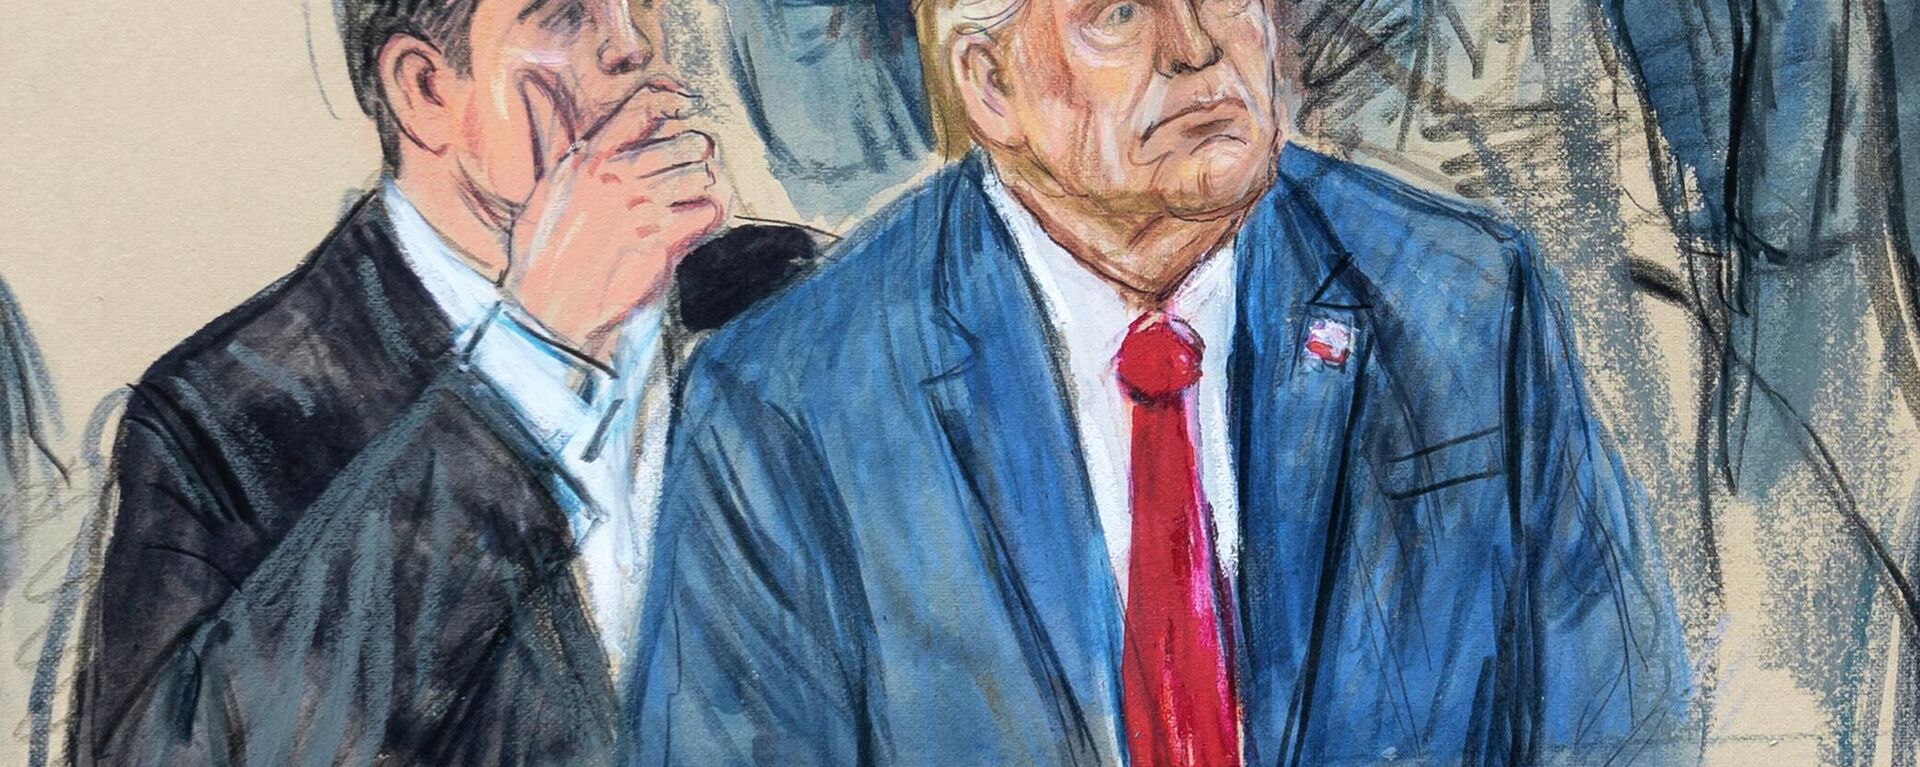 This artist sketch depicts former President Donald Trump, right, conferring with defense lawyer Todd Blanche, left, during his appearance at the Federal Courthouse in Washington, Thursday, Aug. 3, 2023. Trump pleaded not guilty in Washington’s federal court to charges that he conspired to overturn the 2020 election. - Sputnik International, 1920, 04.08.2023